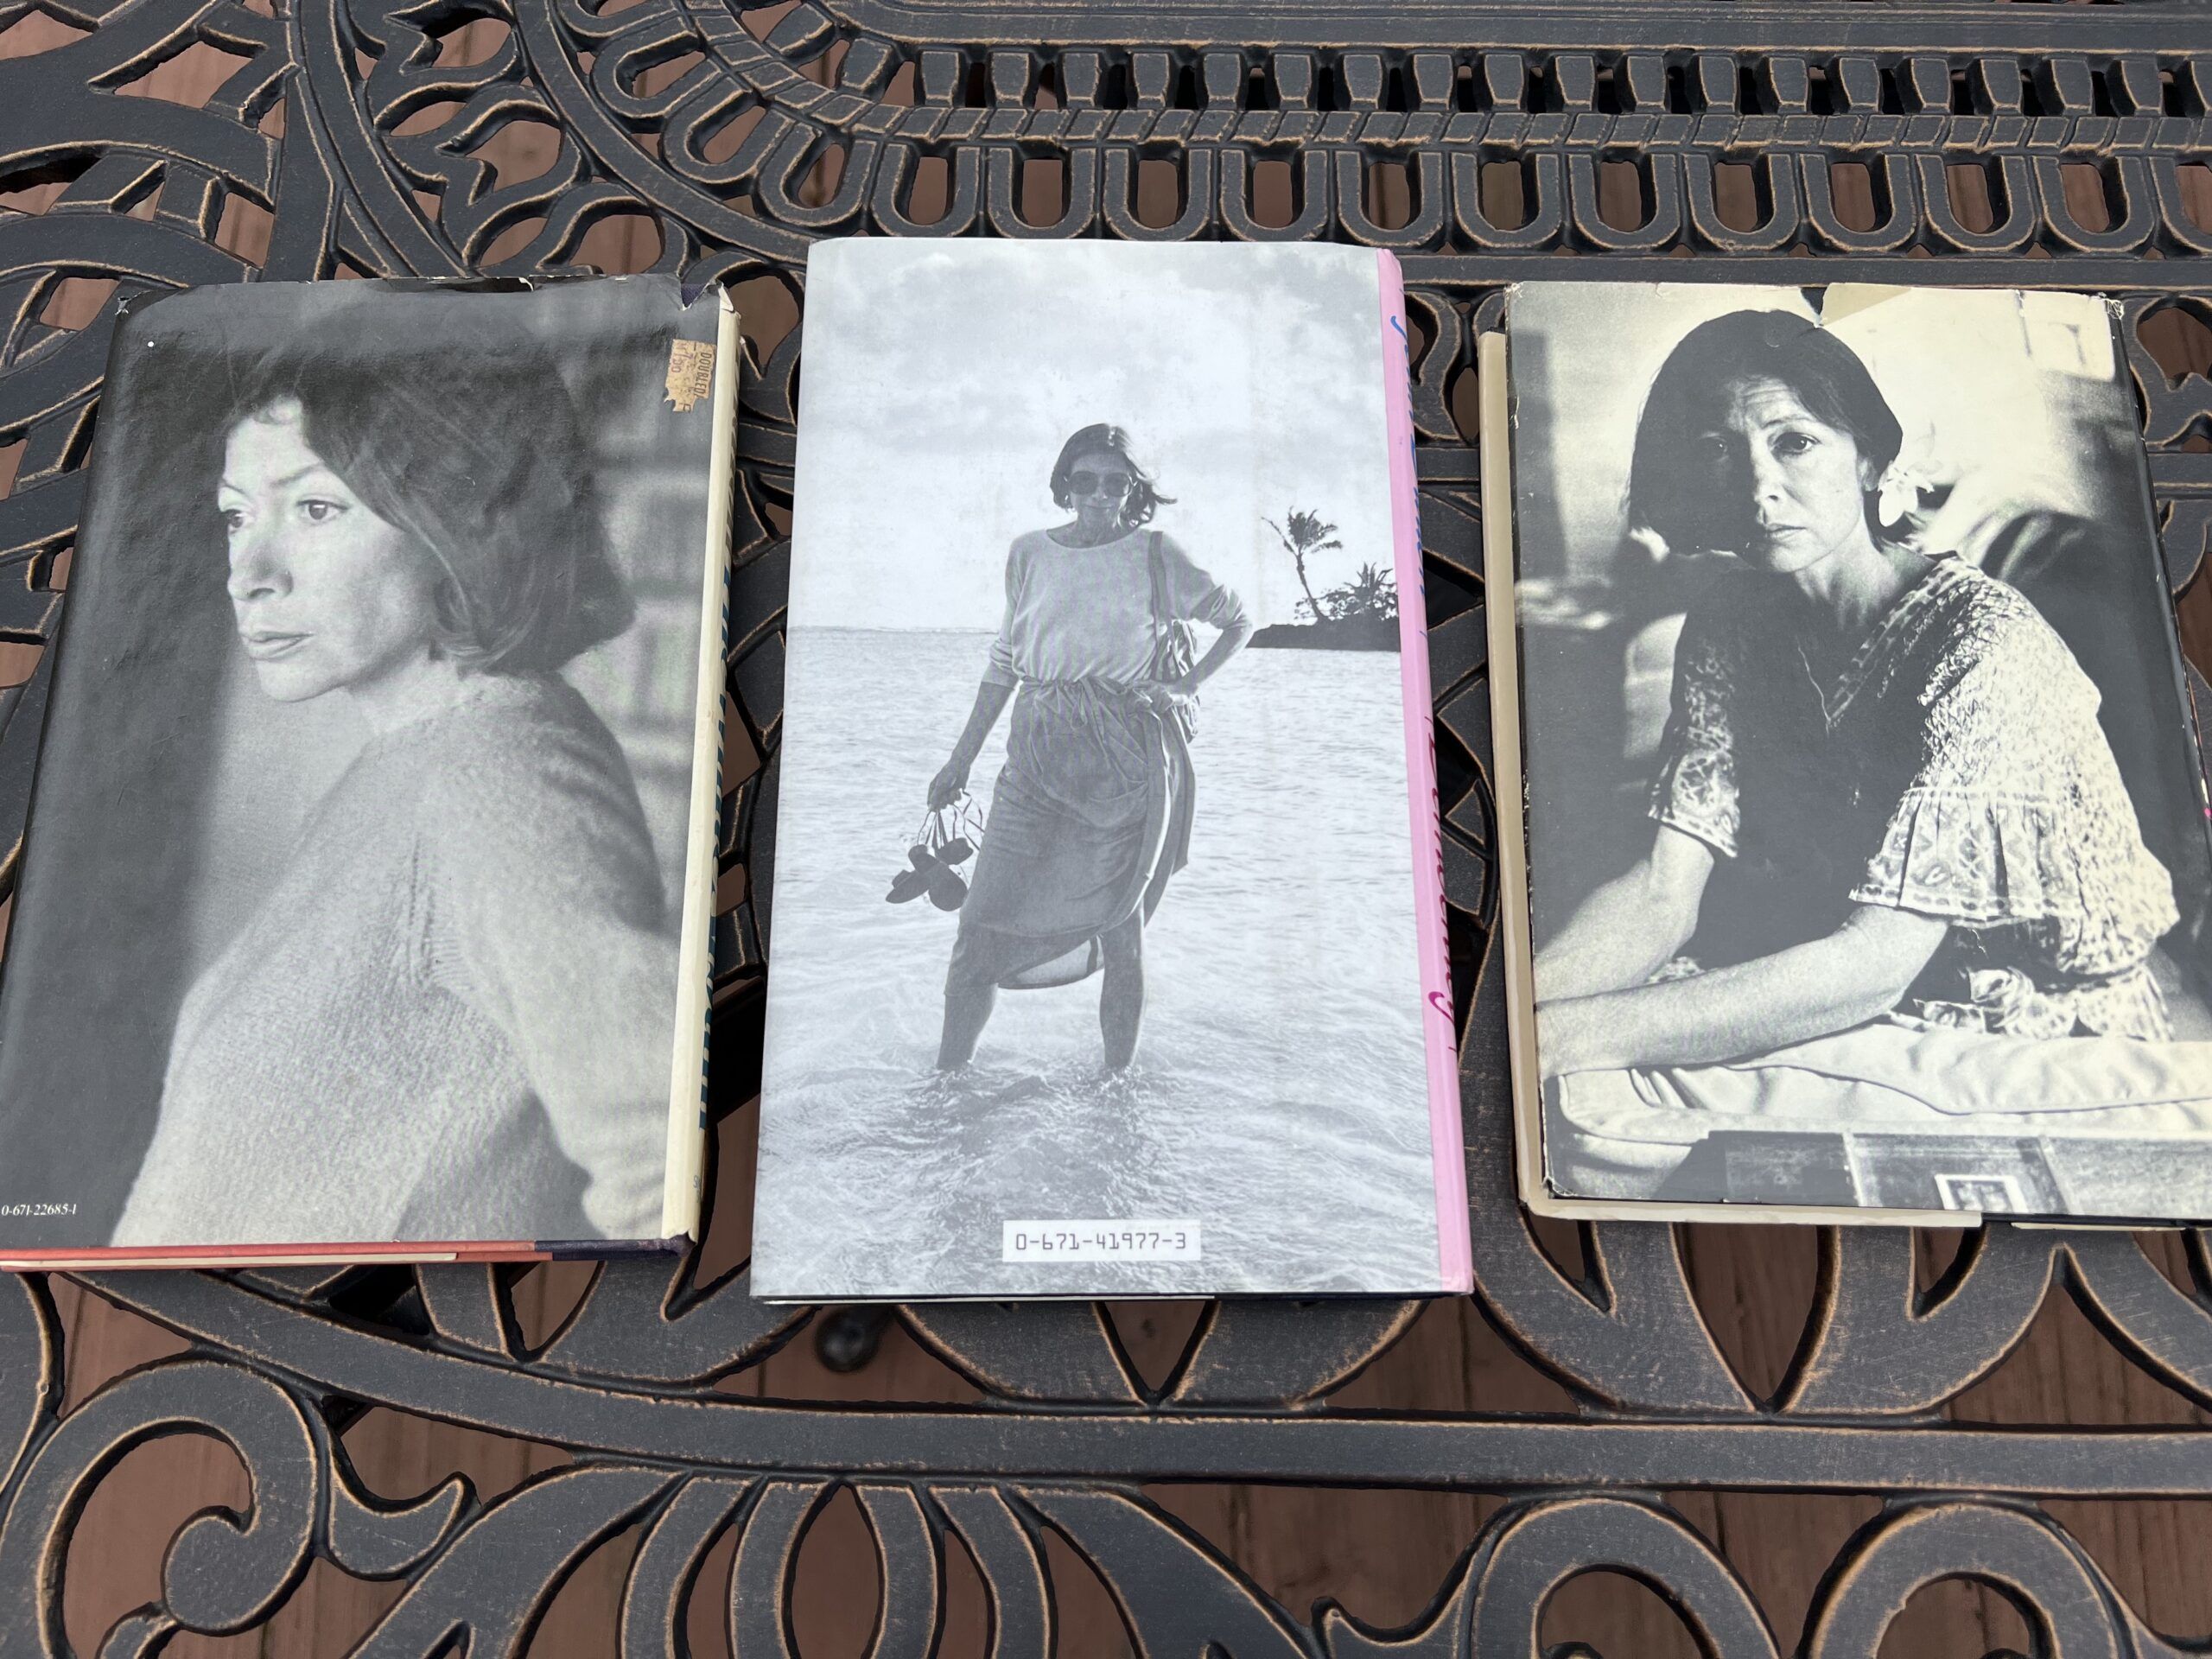 Author photos from three older editions of Joan Didion's books sitting on an iron table. [Photo by Alex Luppens-Dale]